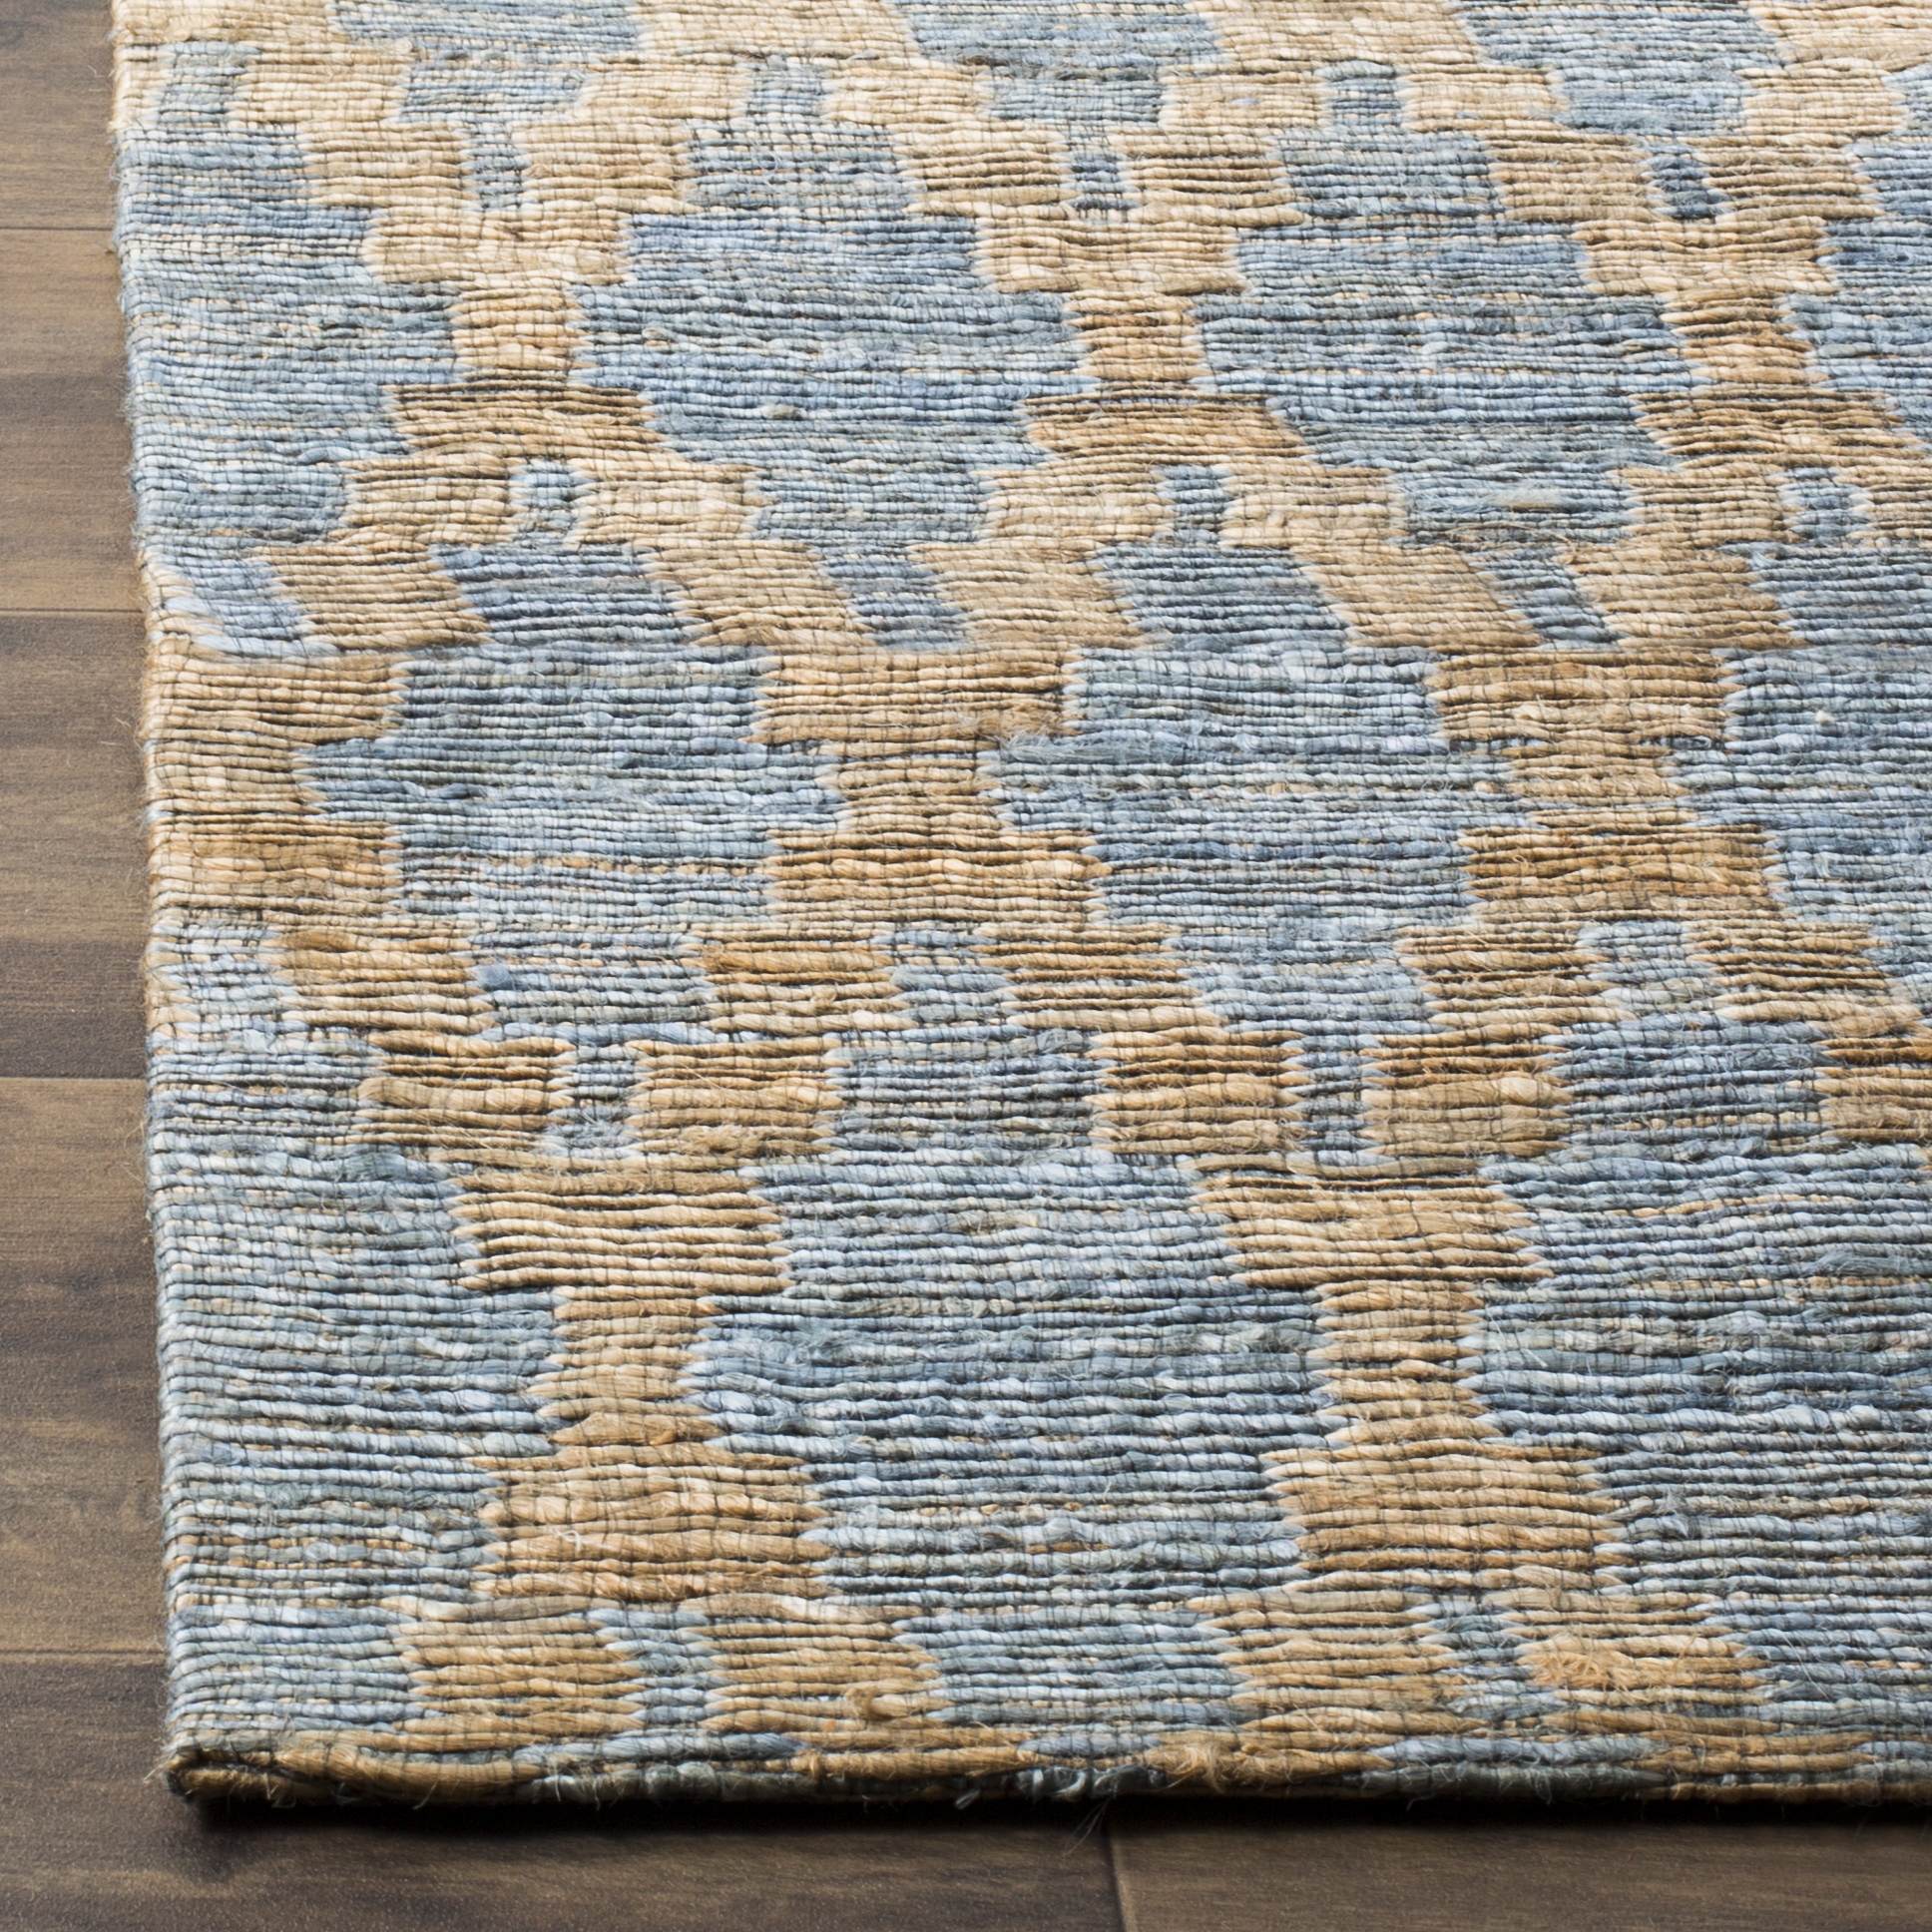 Arlo Home Hand Woven Area Rug, CAP413A, Light Blue/Gold,  6' X 6' Square - Image 1